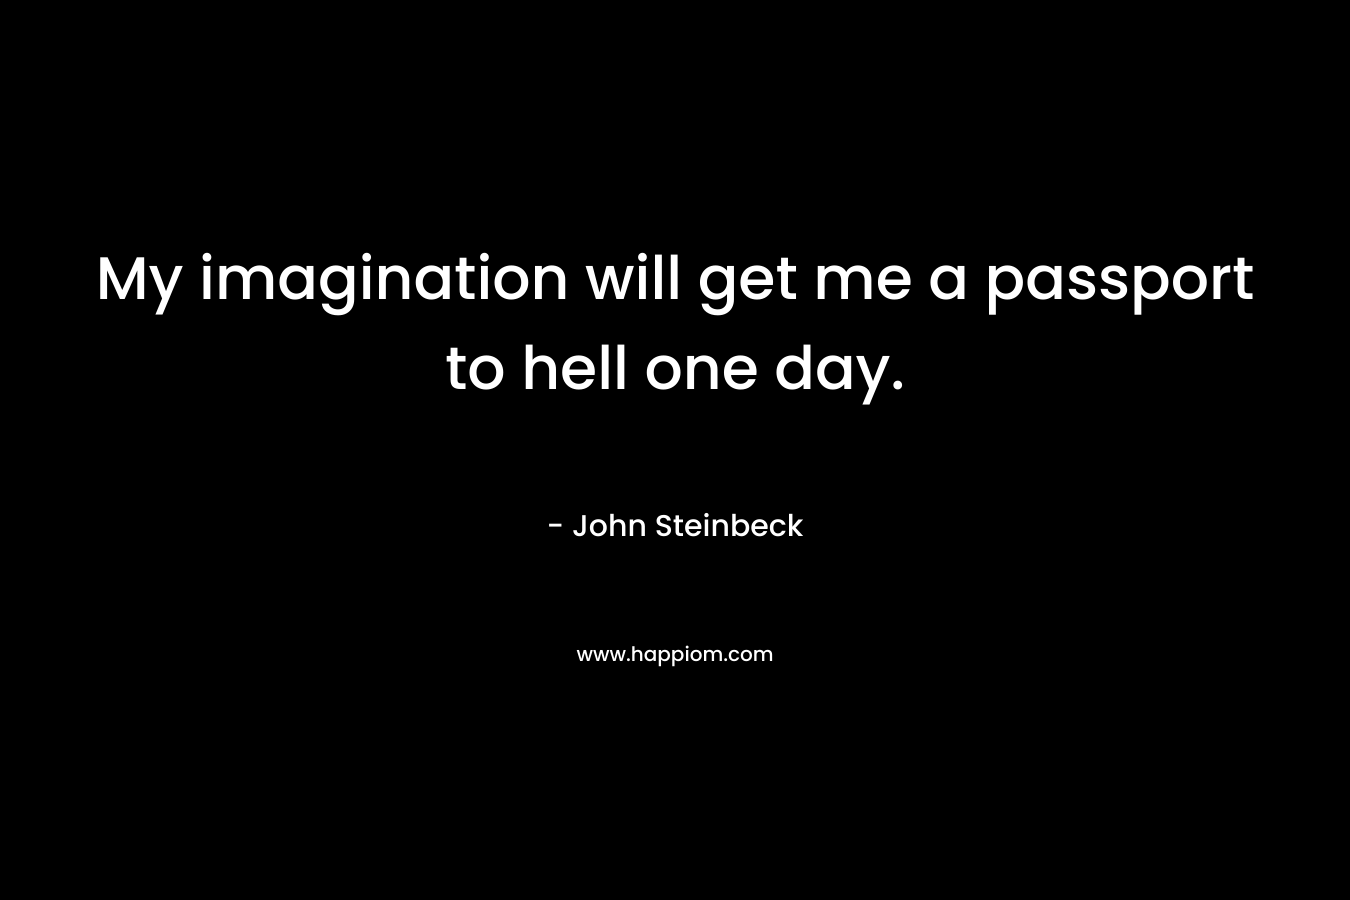 My imagination will get me a passport to hell one day. – John Steinbeck